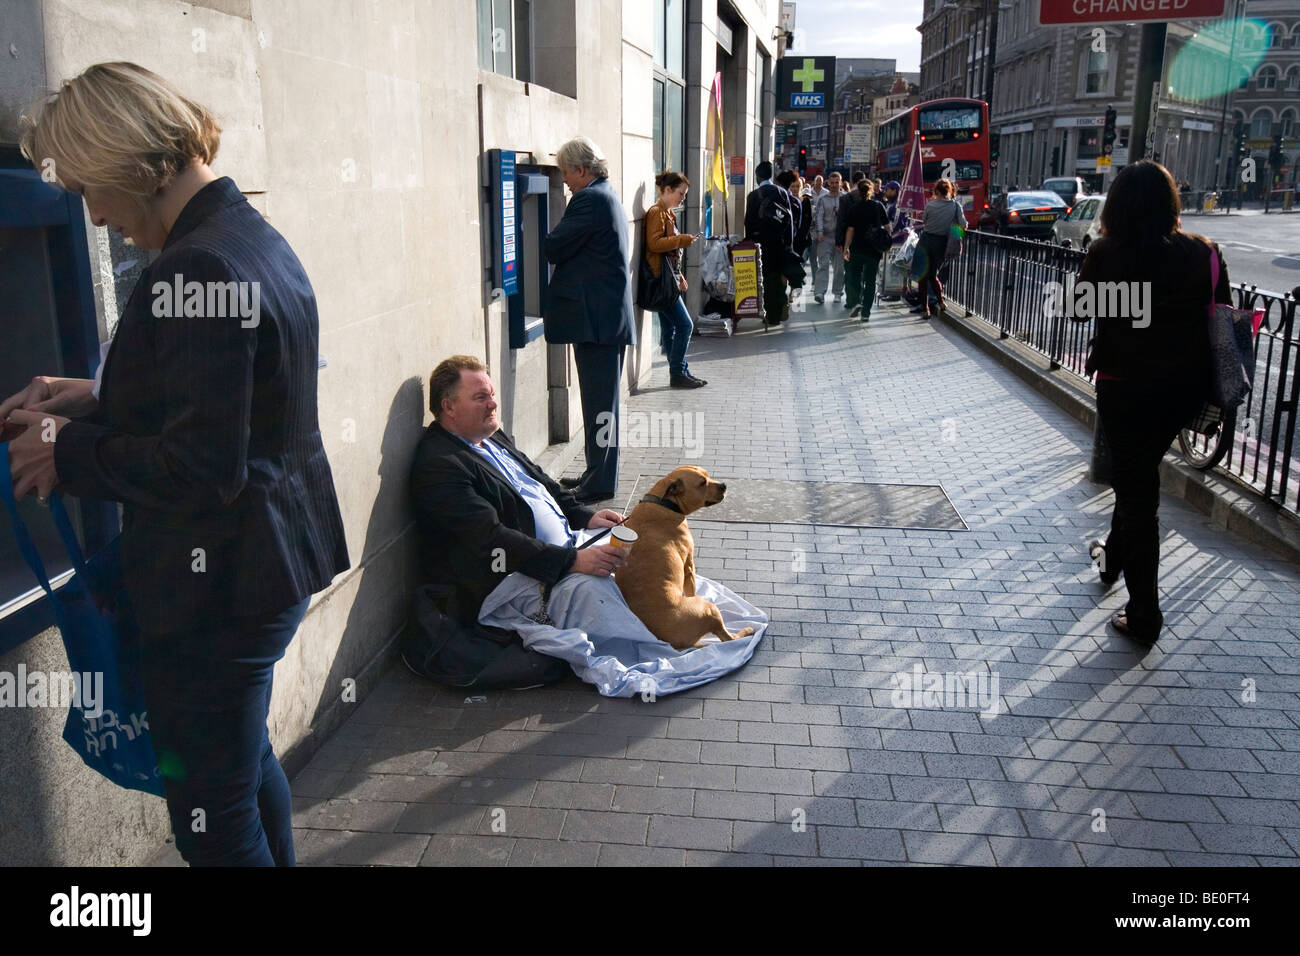 A street beggar strategically seated between two ATM machines in Borough High St, London, SE1 Stock Photo